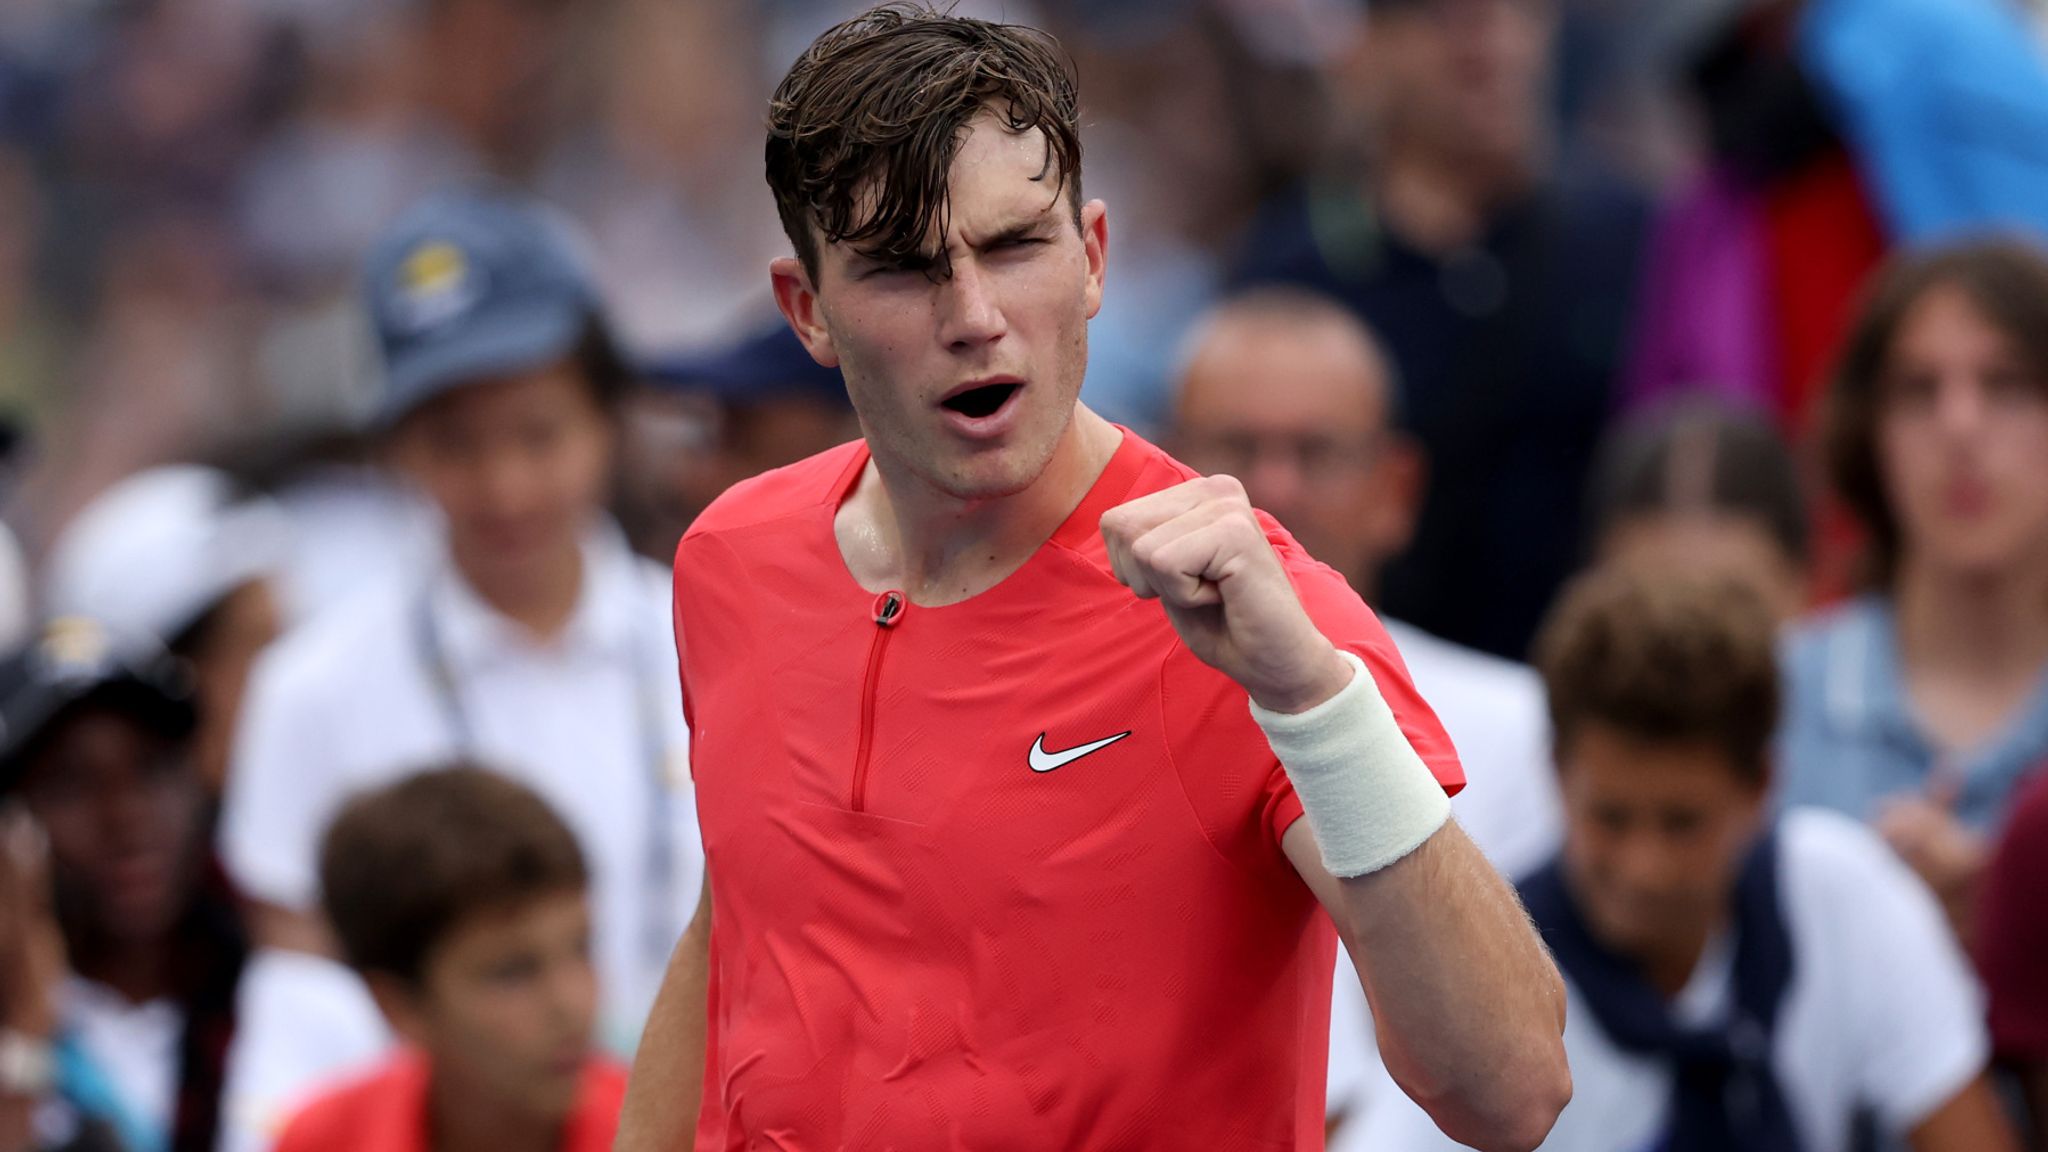 US Open Jack Draper storms into third round at Flushing Meadows with Hubert Hurkacz win Tennis News Sky Sports